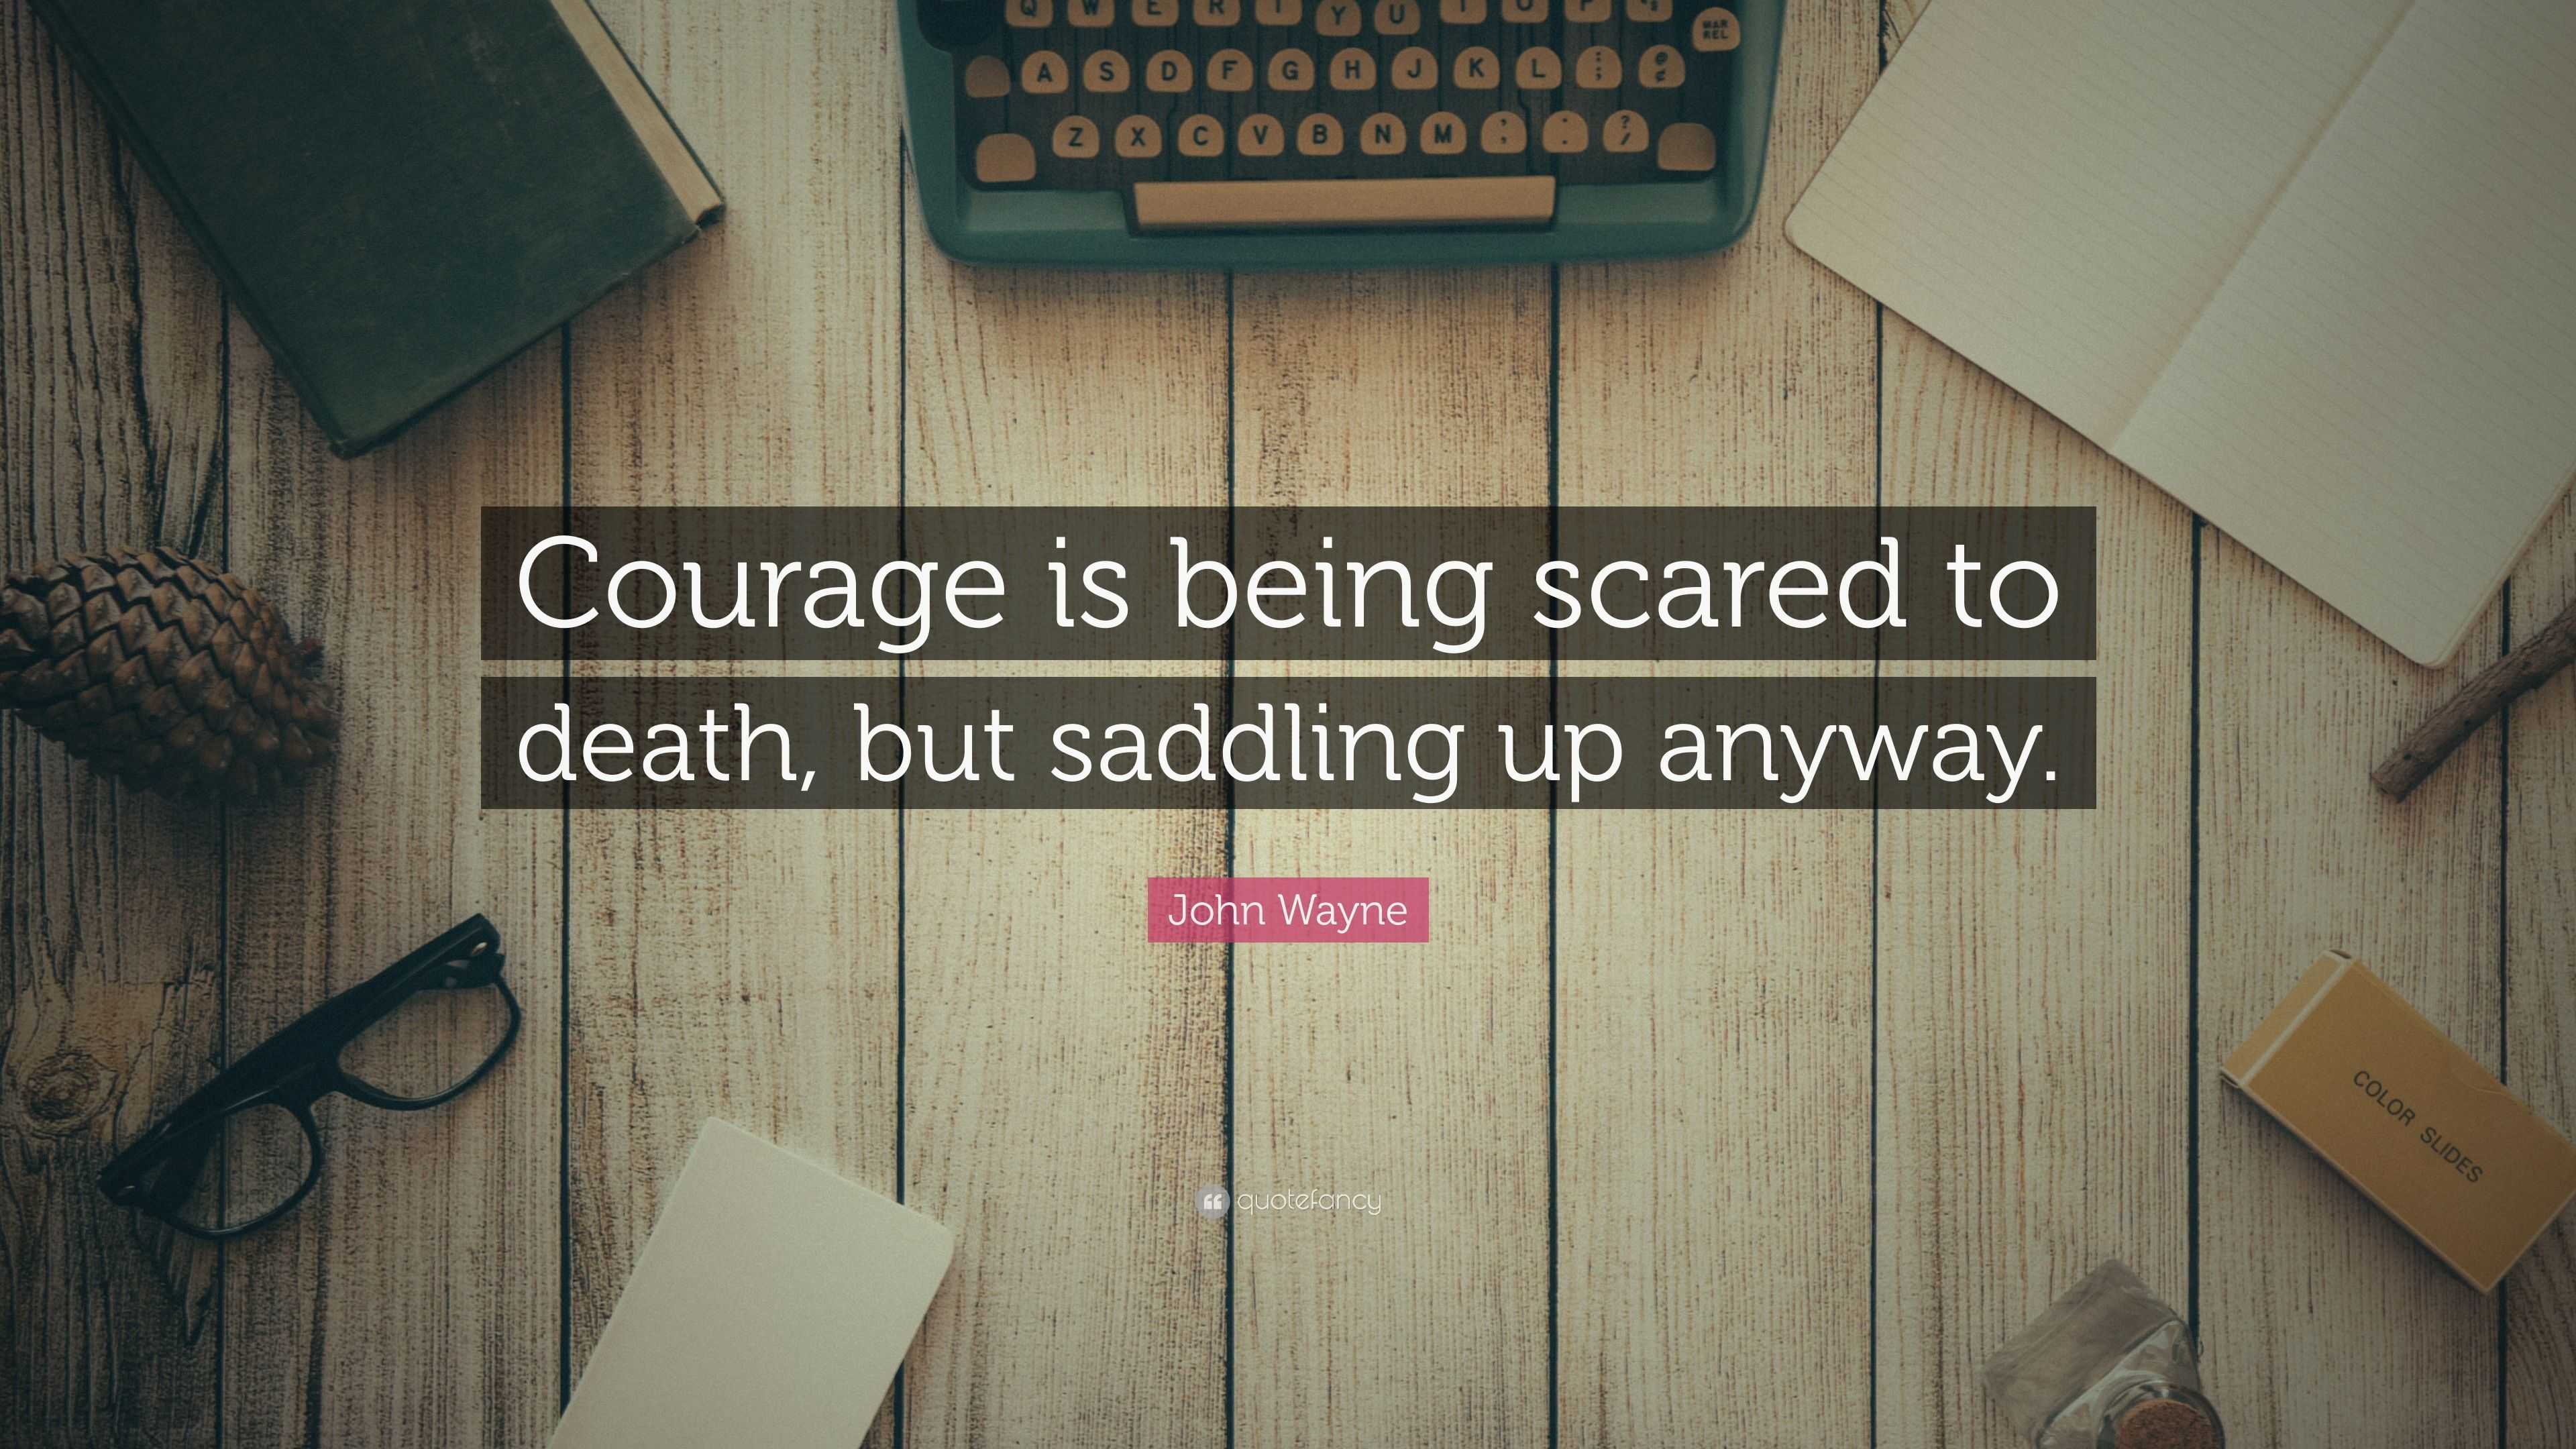 4681585 John Wayne Quote Courage is being scared to death but saddling up